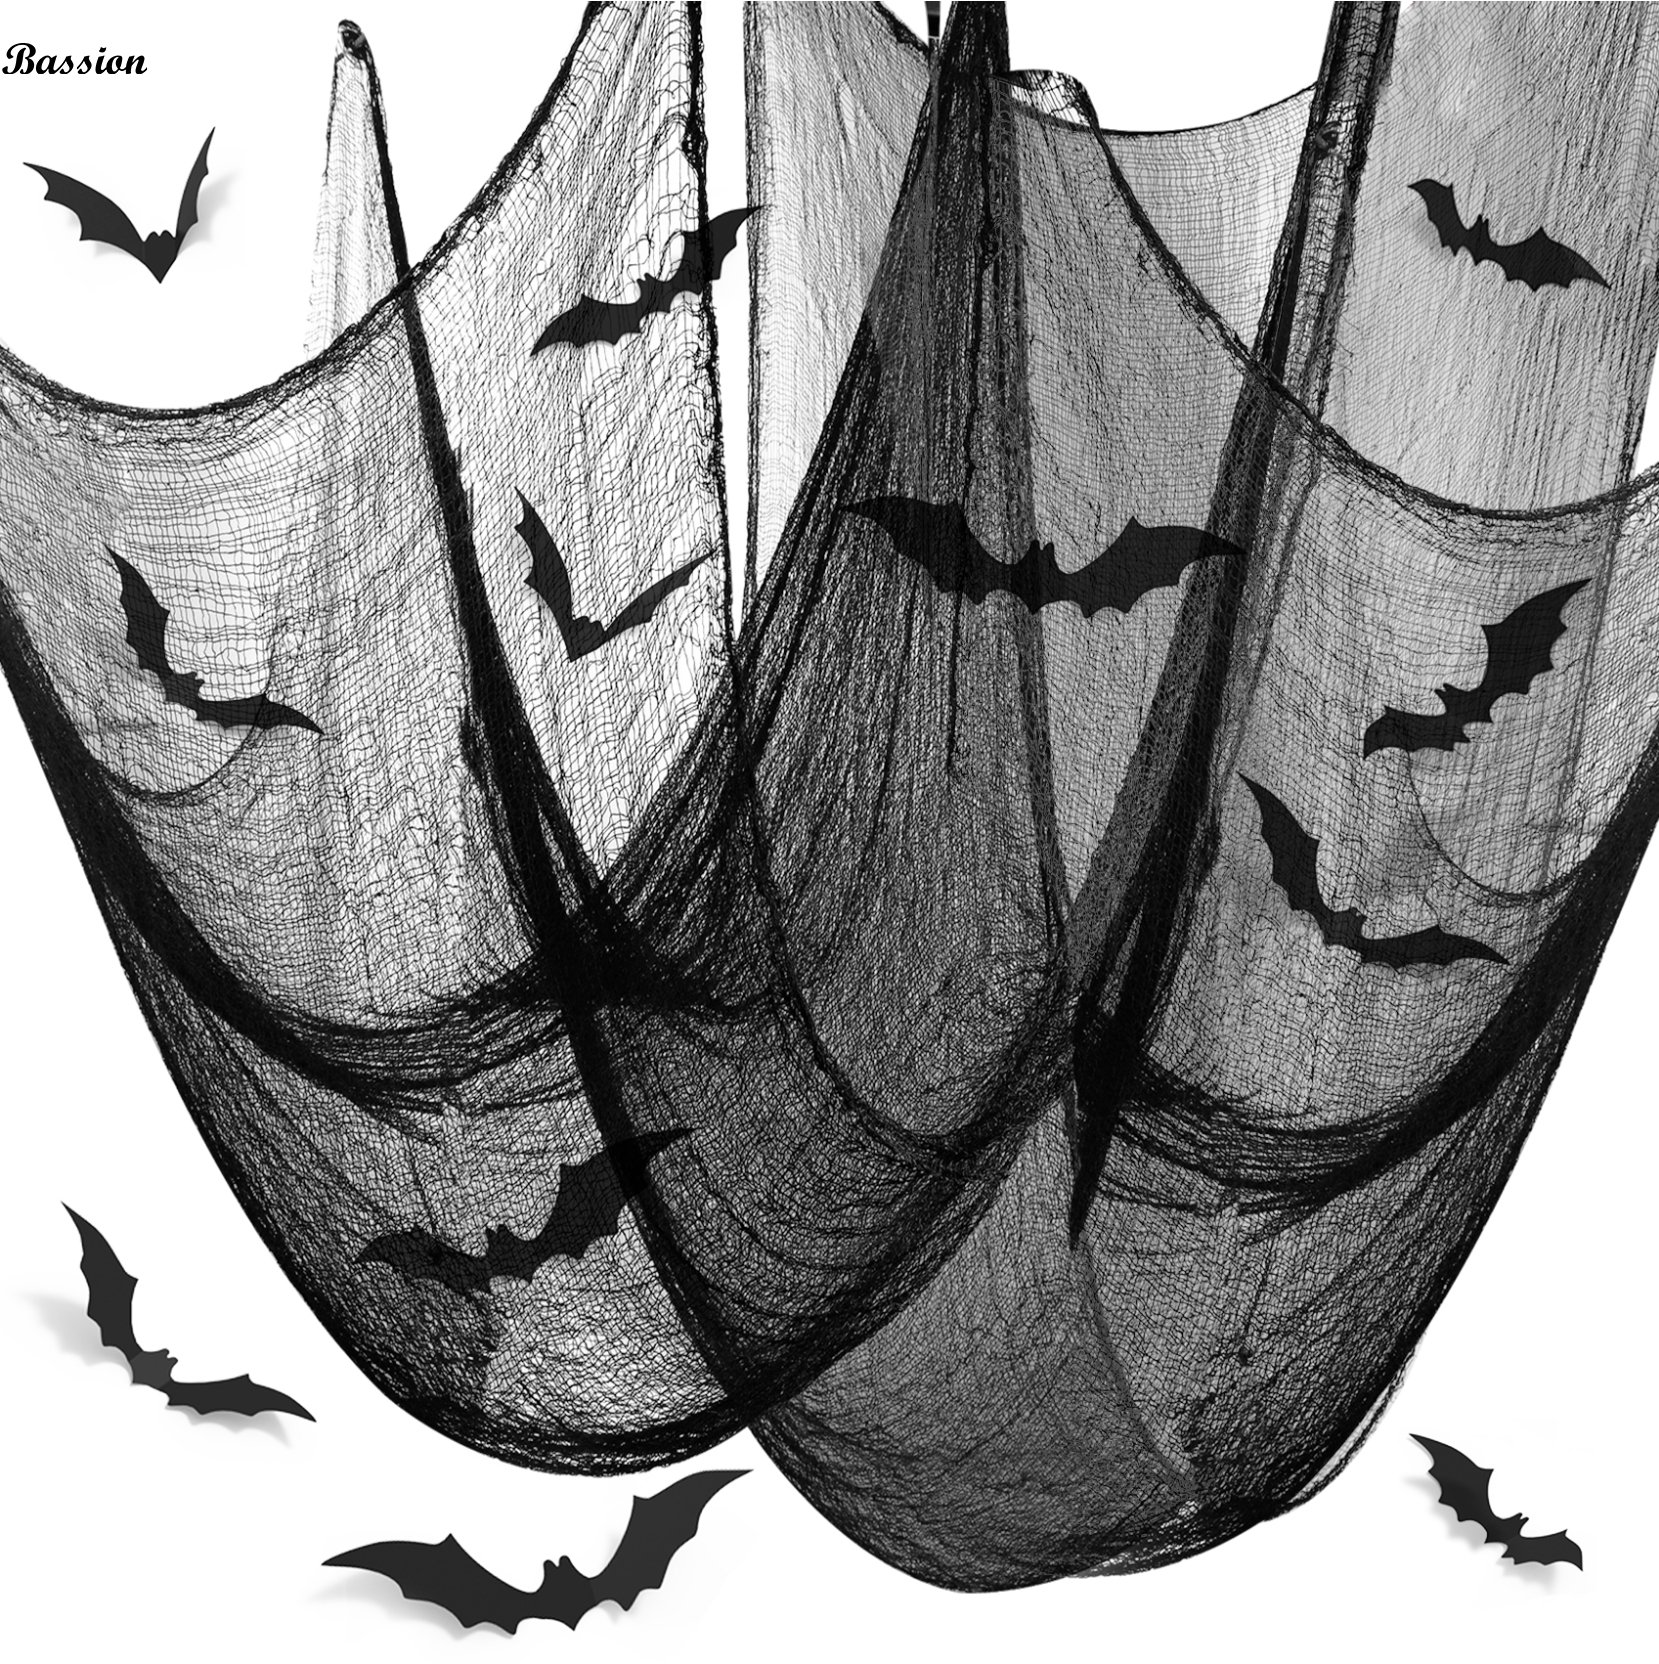 Bassion Halloween Creepy Cloth Black Cheesecloth with 12PCS Bats Stickers, Spider Webs Halloween Decorations Haunted Party Supplies Outdoor 78X197"